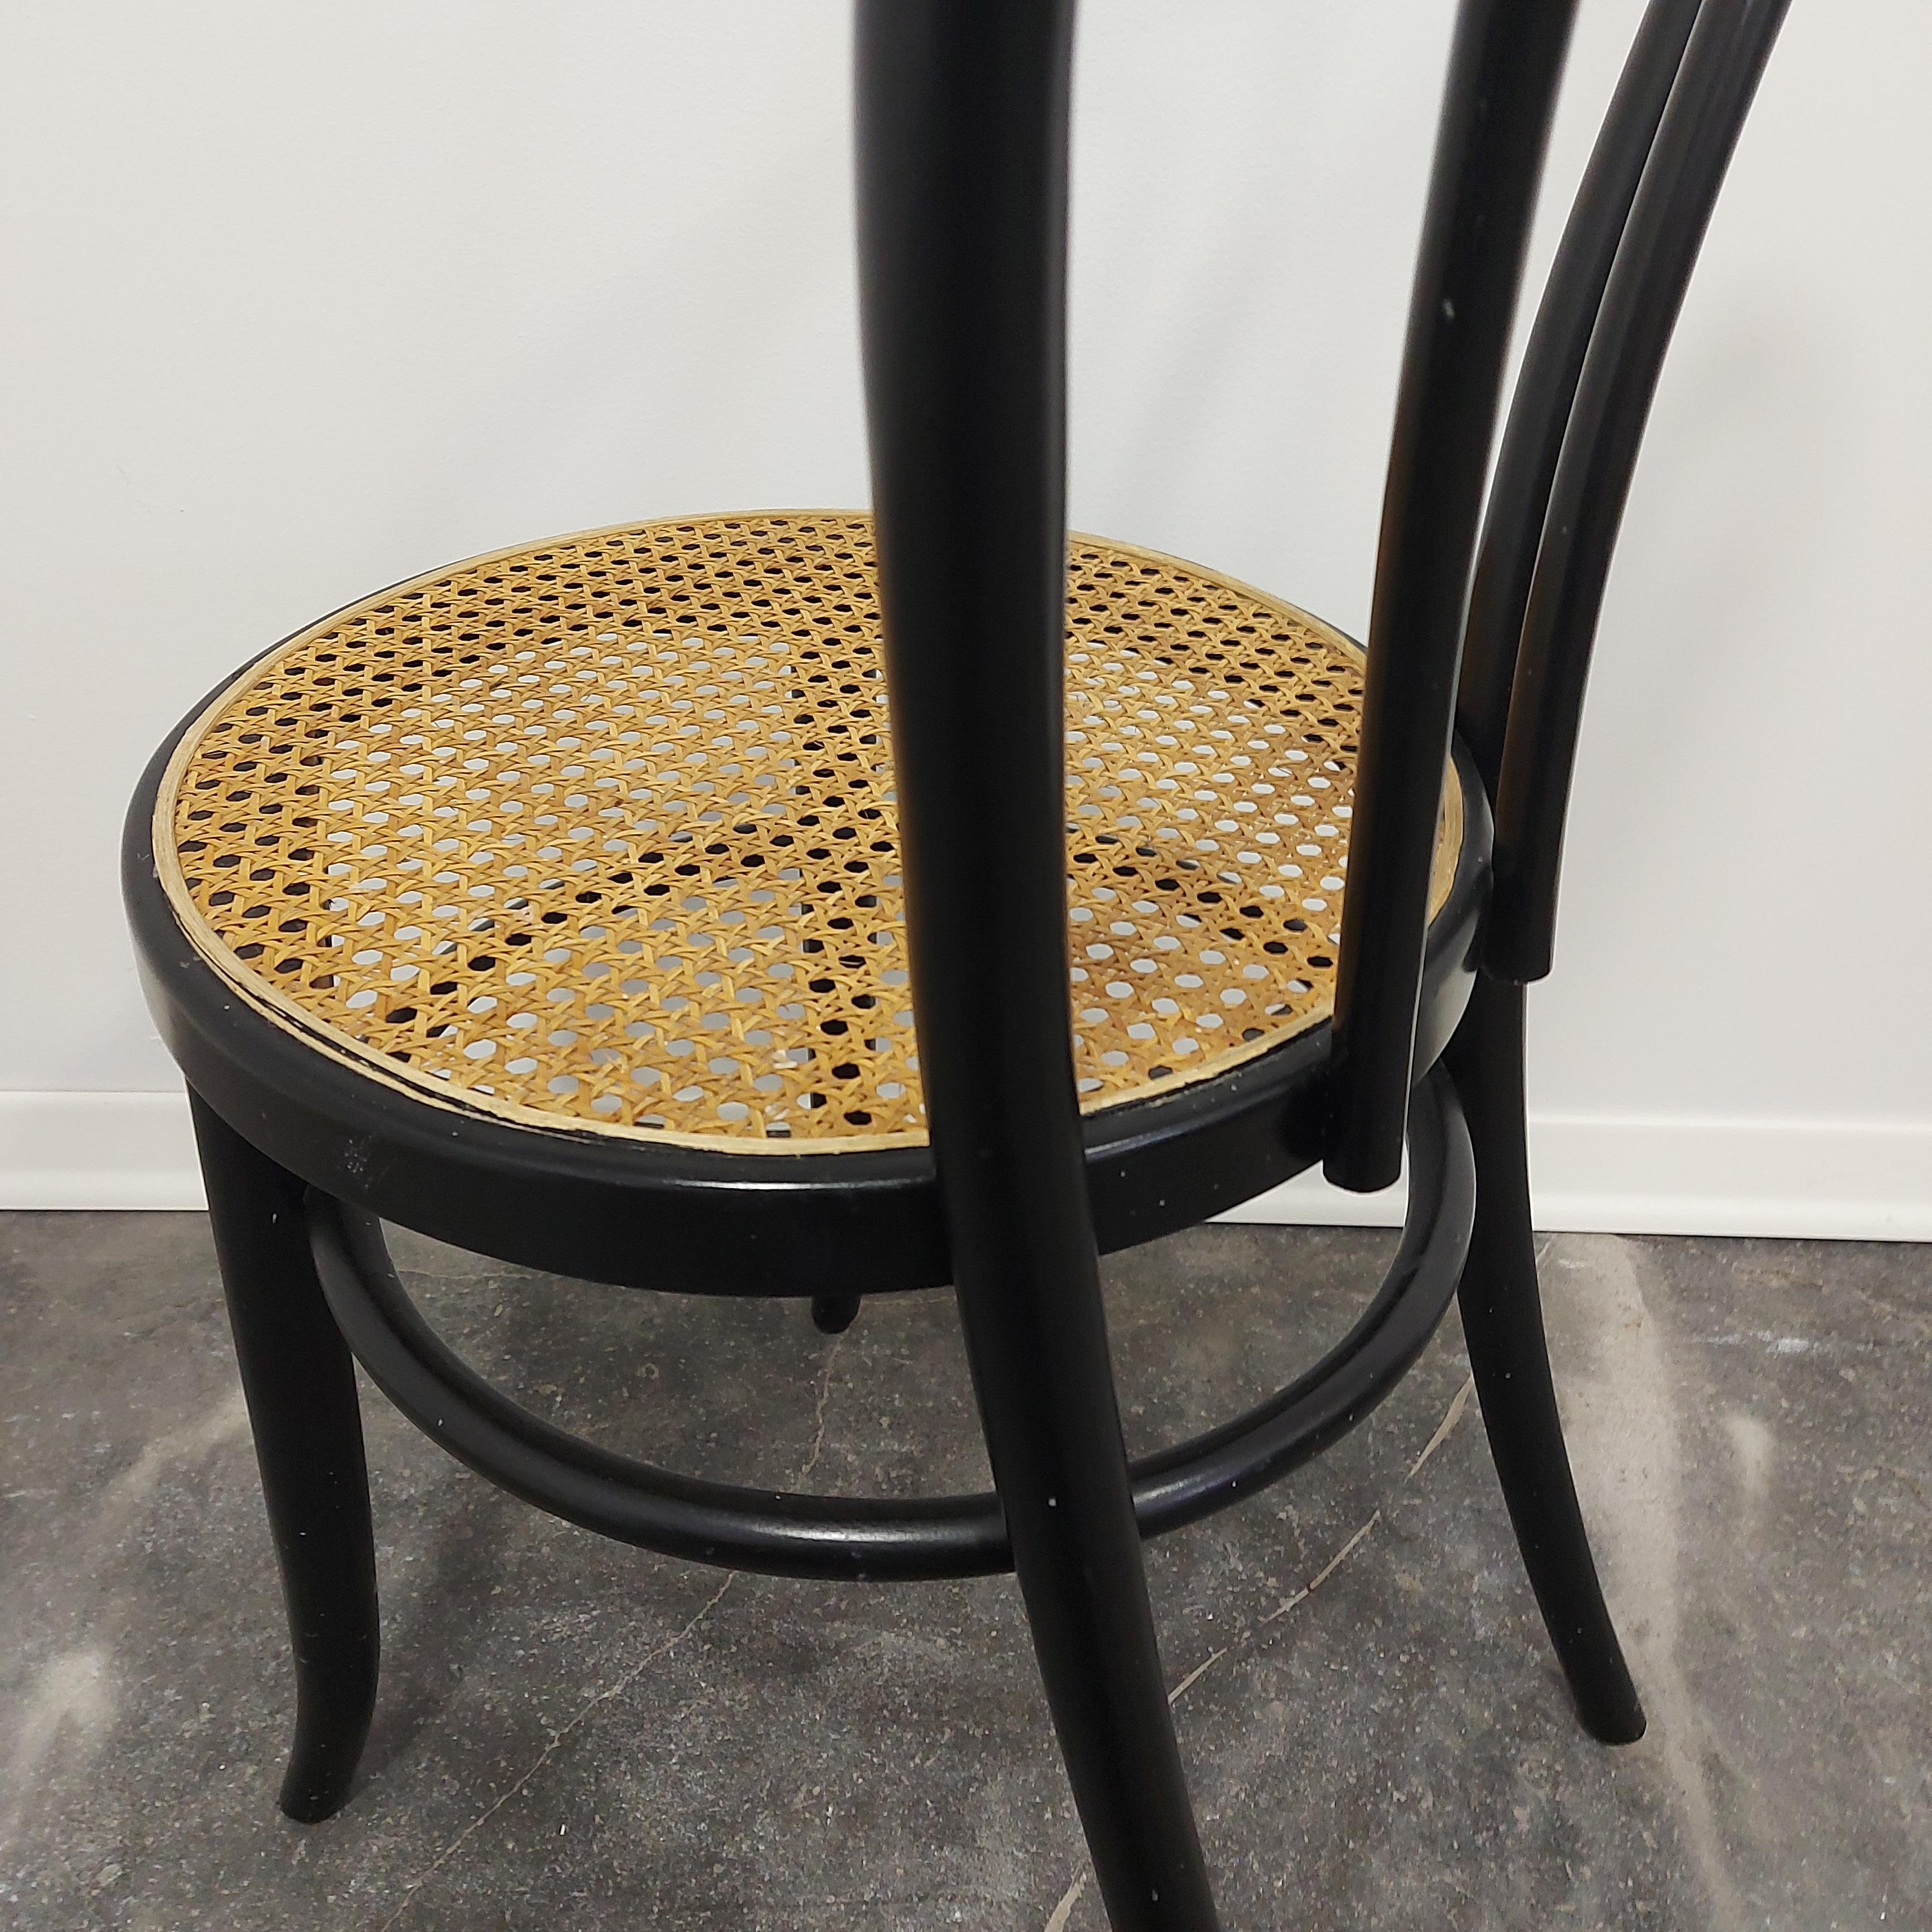 Chair by Thonet, No. 18 